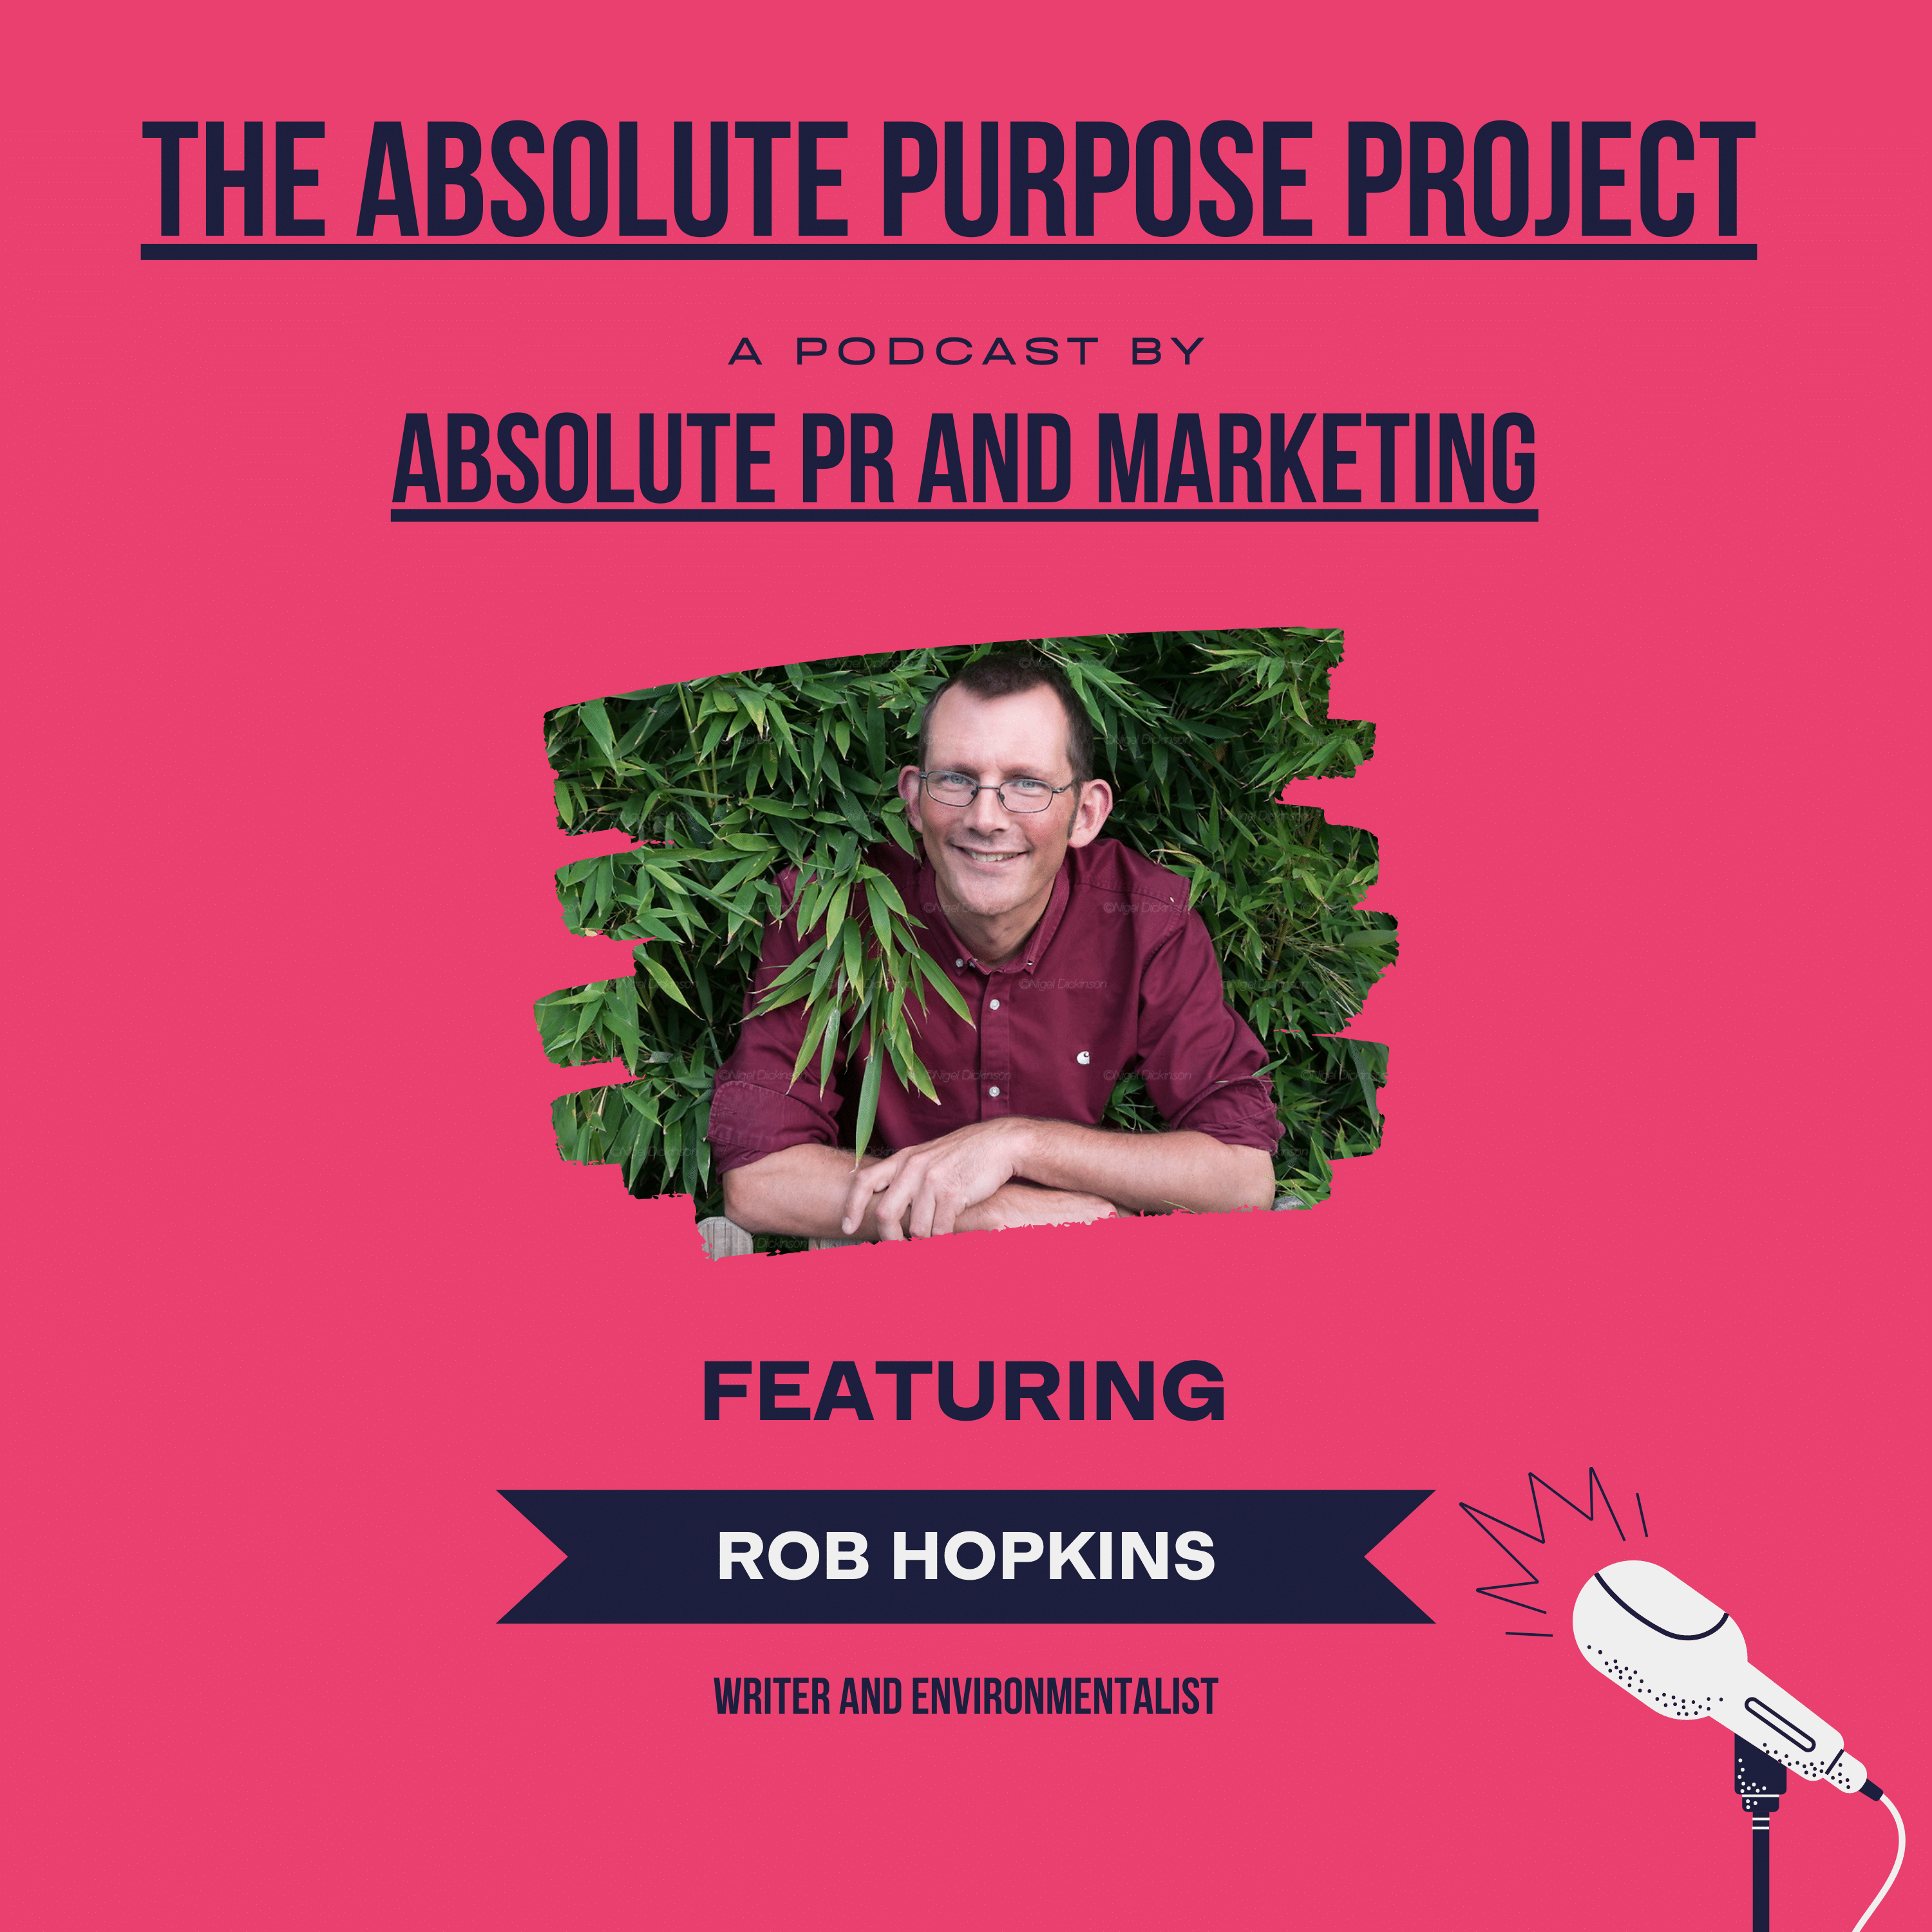 Rob Hopkins is on The Absolue Purpose Project podcast series